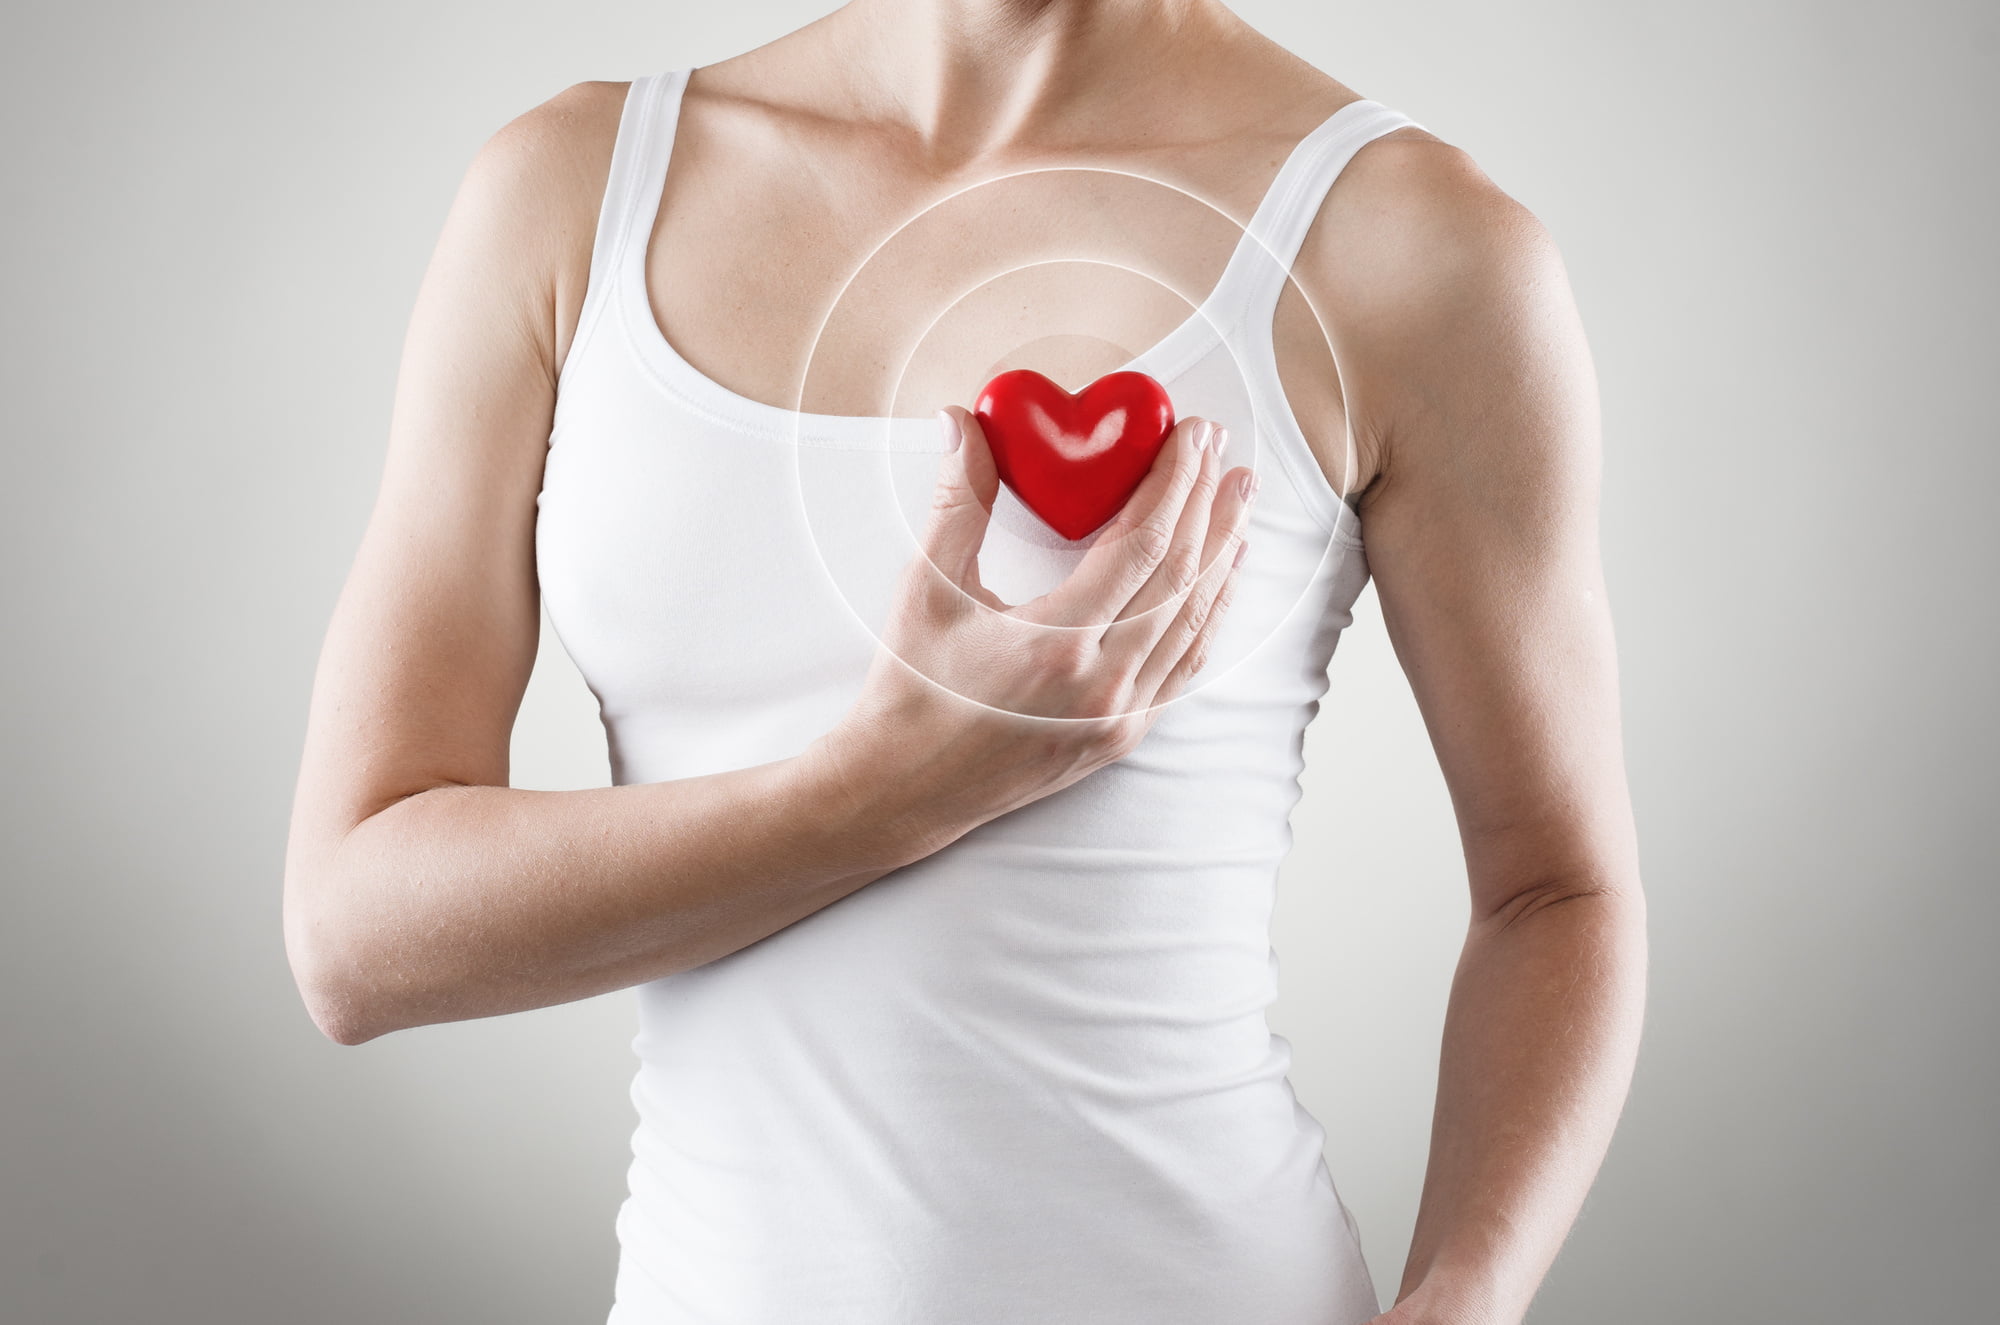 It's normal to feel concerned if your heart is fluttering or skipping beats. Here are the top 3 signs you're having heart palpitations.